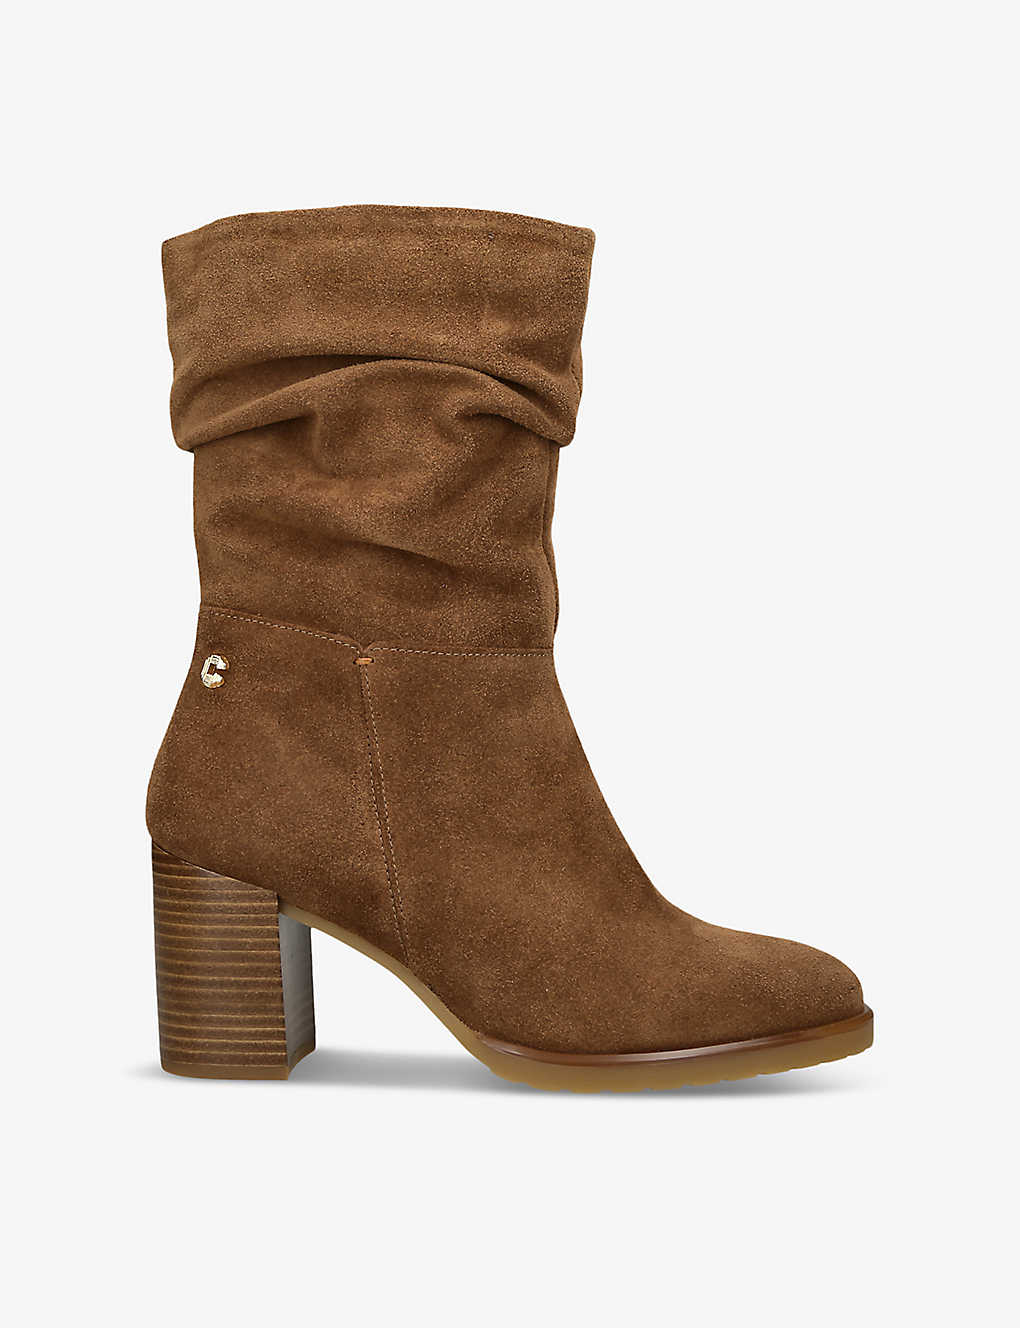 Carvela Comfort Turnup Ruched Suede Heeled Boots In Tan